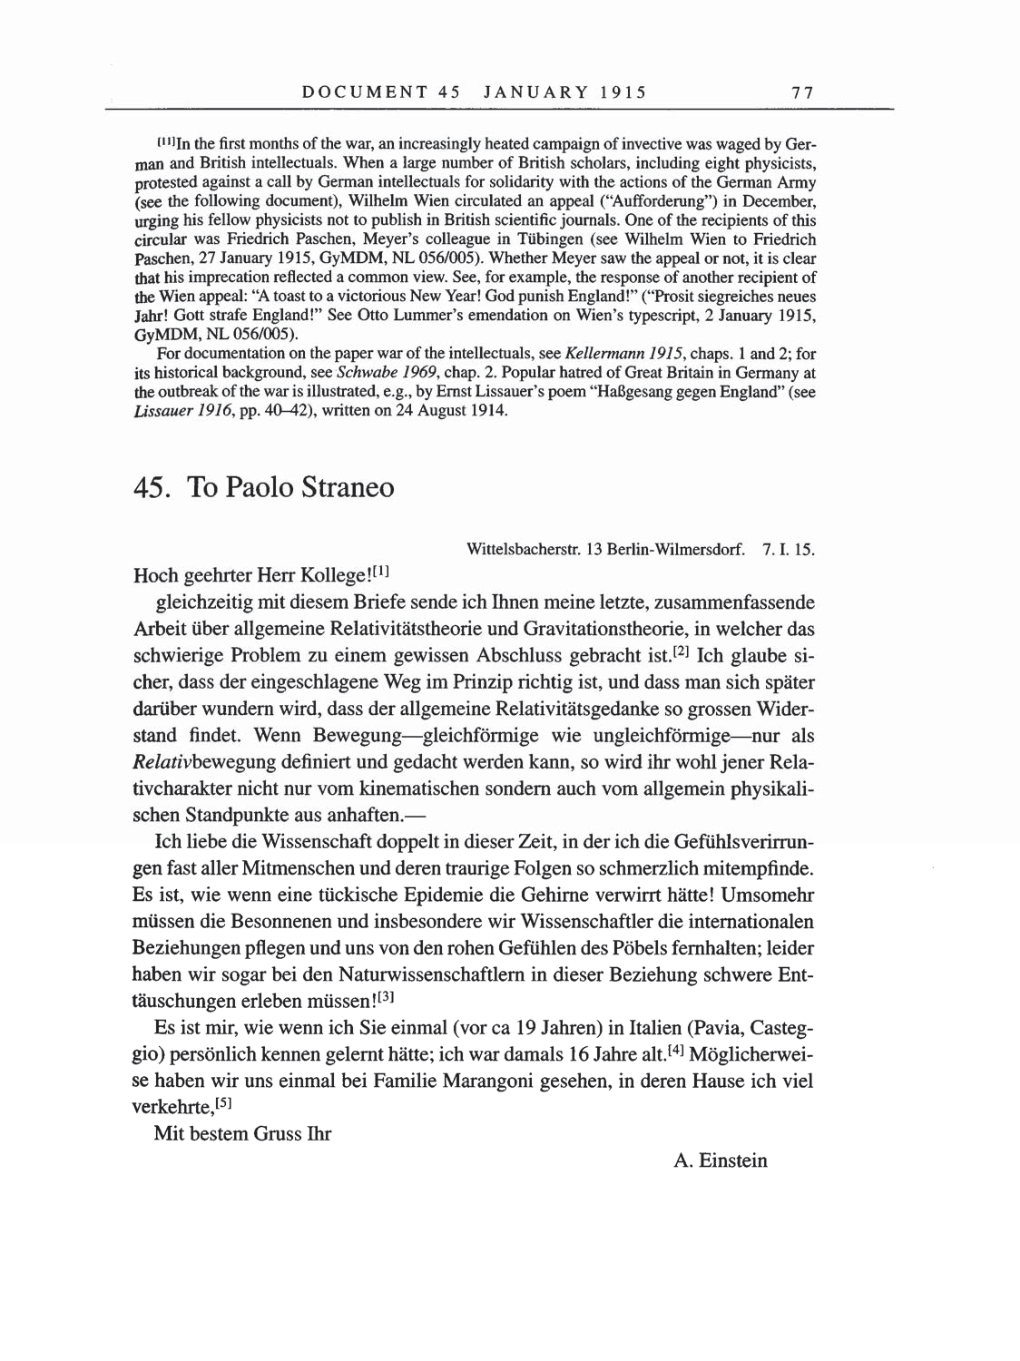 Volume 8, Part A: The Berlin Years: Correspondence 1914-1917 page 77